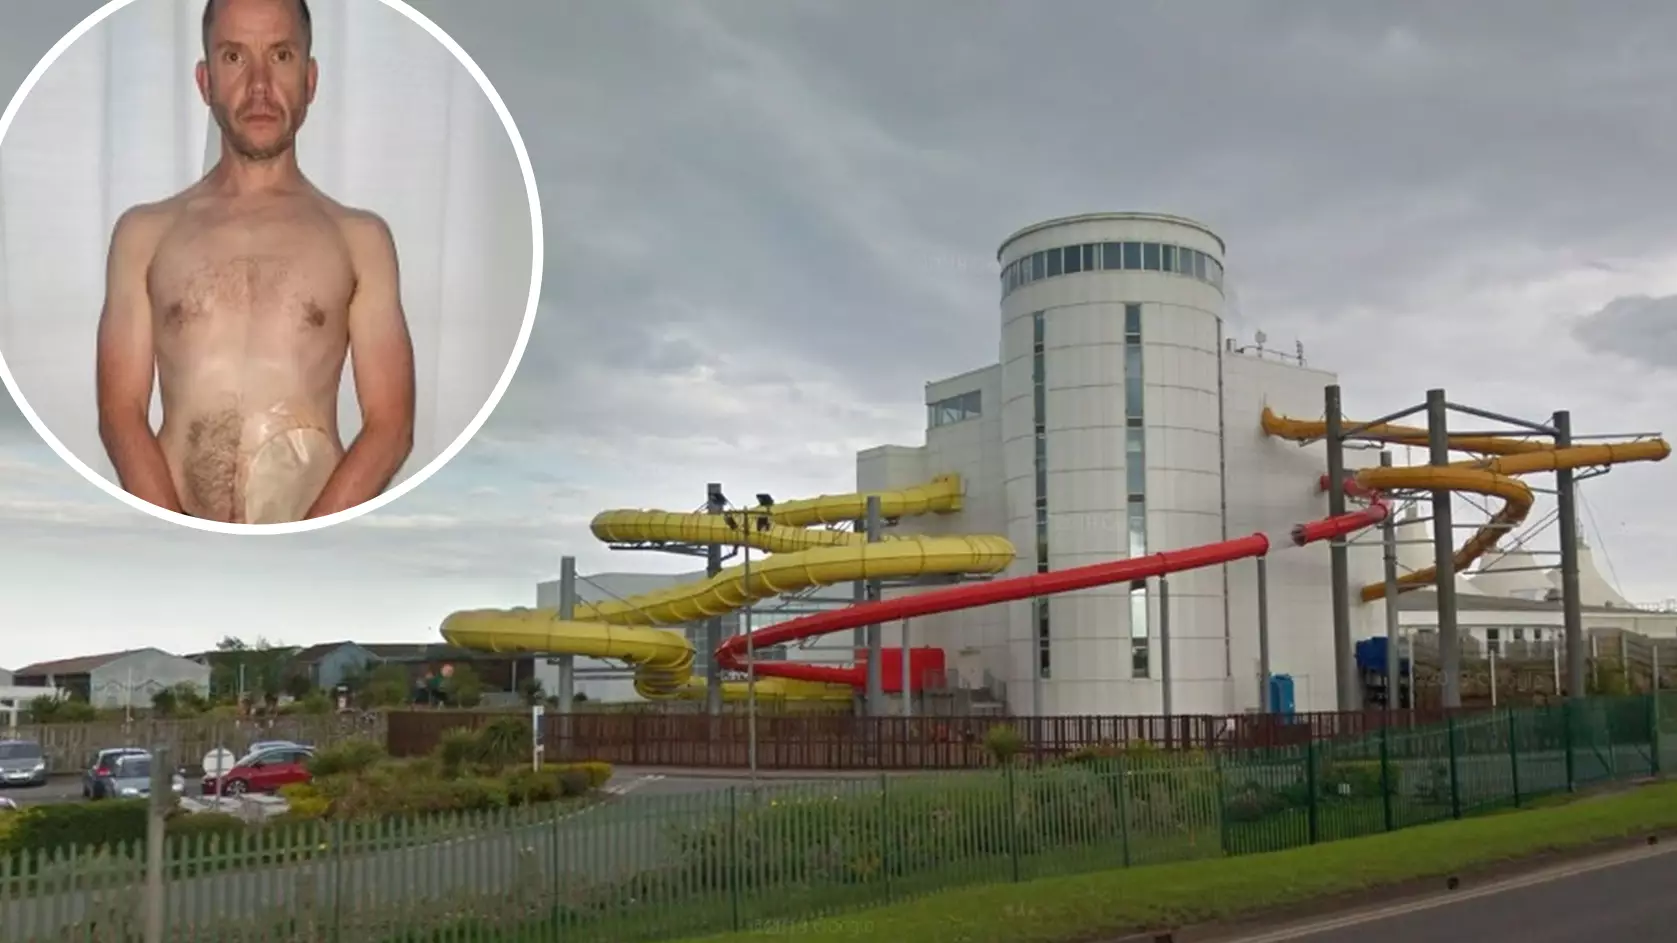 Butlins Staff Kick Dad With Crohn's Out Of Pool For Having Colostomy Bag